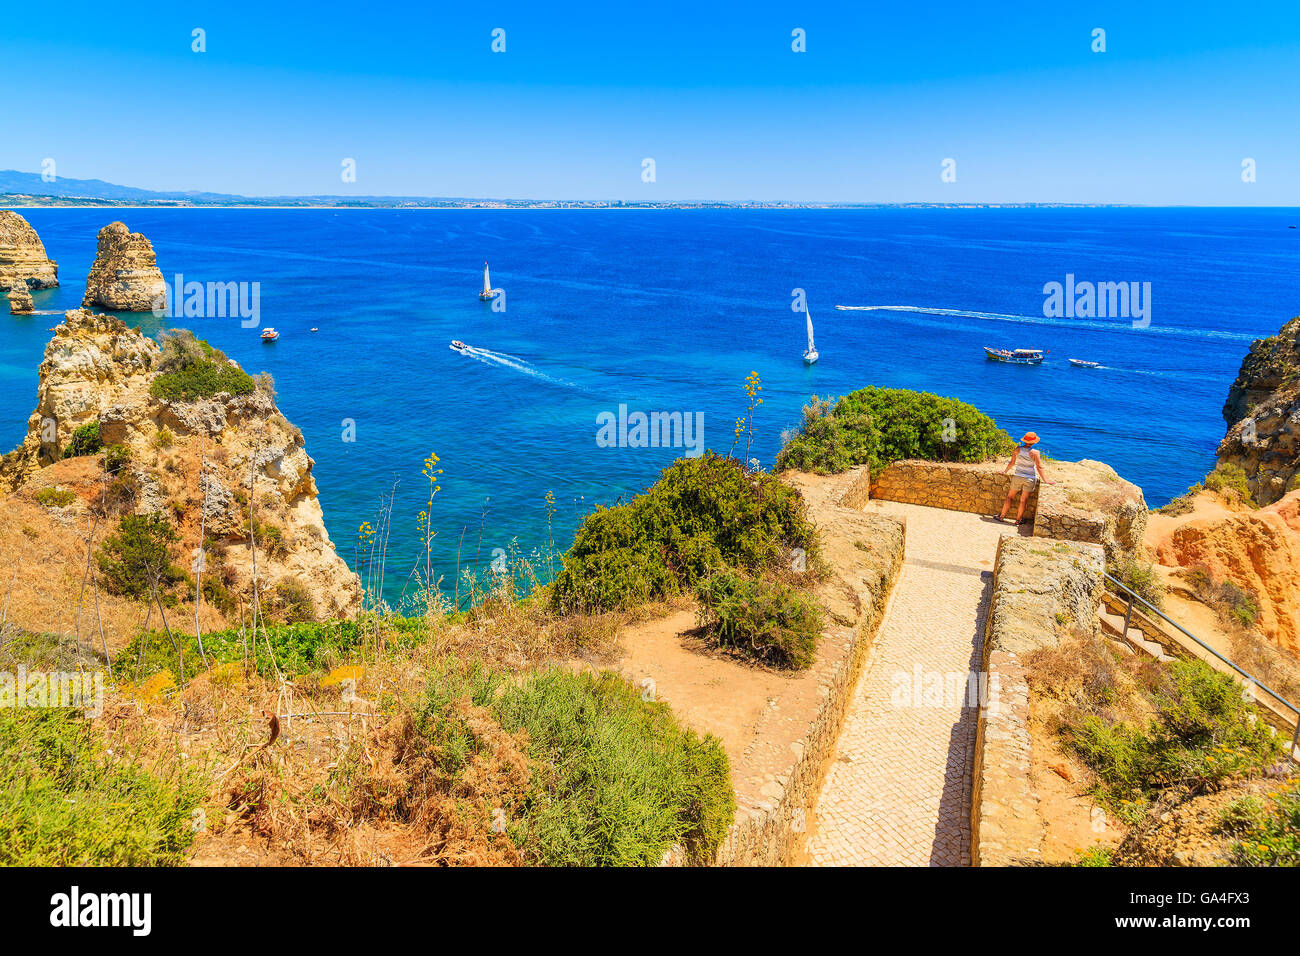 Young woman tourist standing on a viewpoint and looking at blue sea, Ponta da Piedade, Portugal Stock Photo